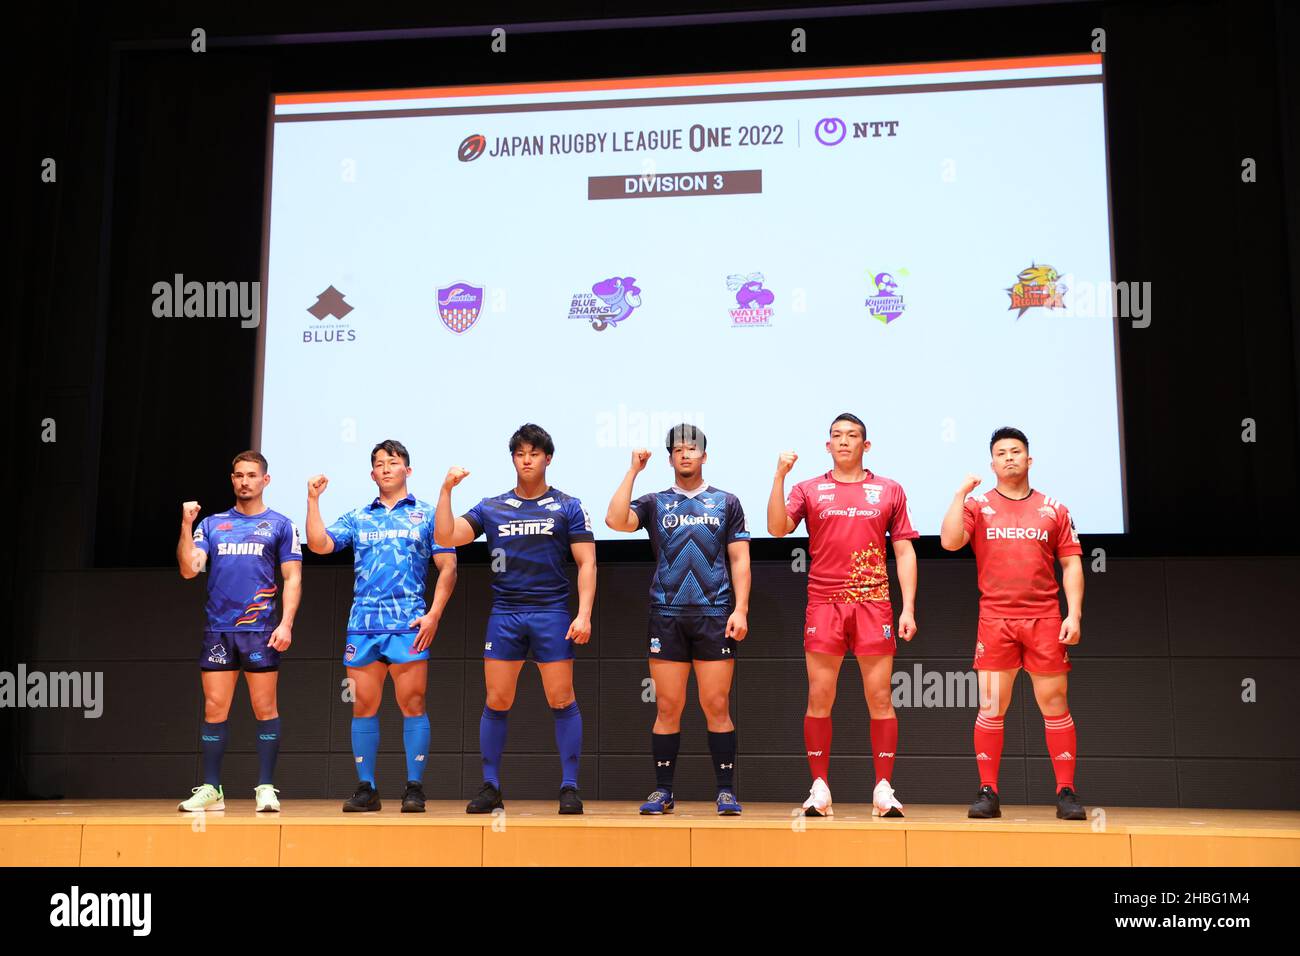 Tokyo, Japan. 20th Dec, 2021. Japan Rugby League One DIVISION 3/General view Rugby : Press conference before Japan Rugby League One opening match in Tokyo, Japan . Credit: Yohei Osada/AFLO SPORT/Alamy Live News Stock Photo